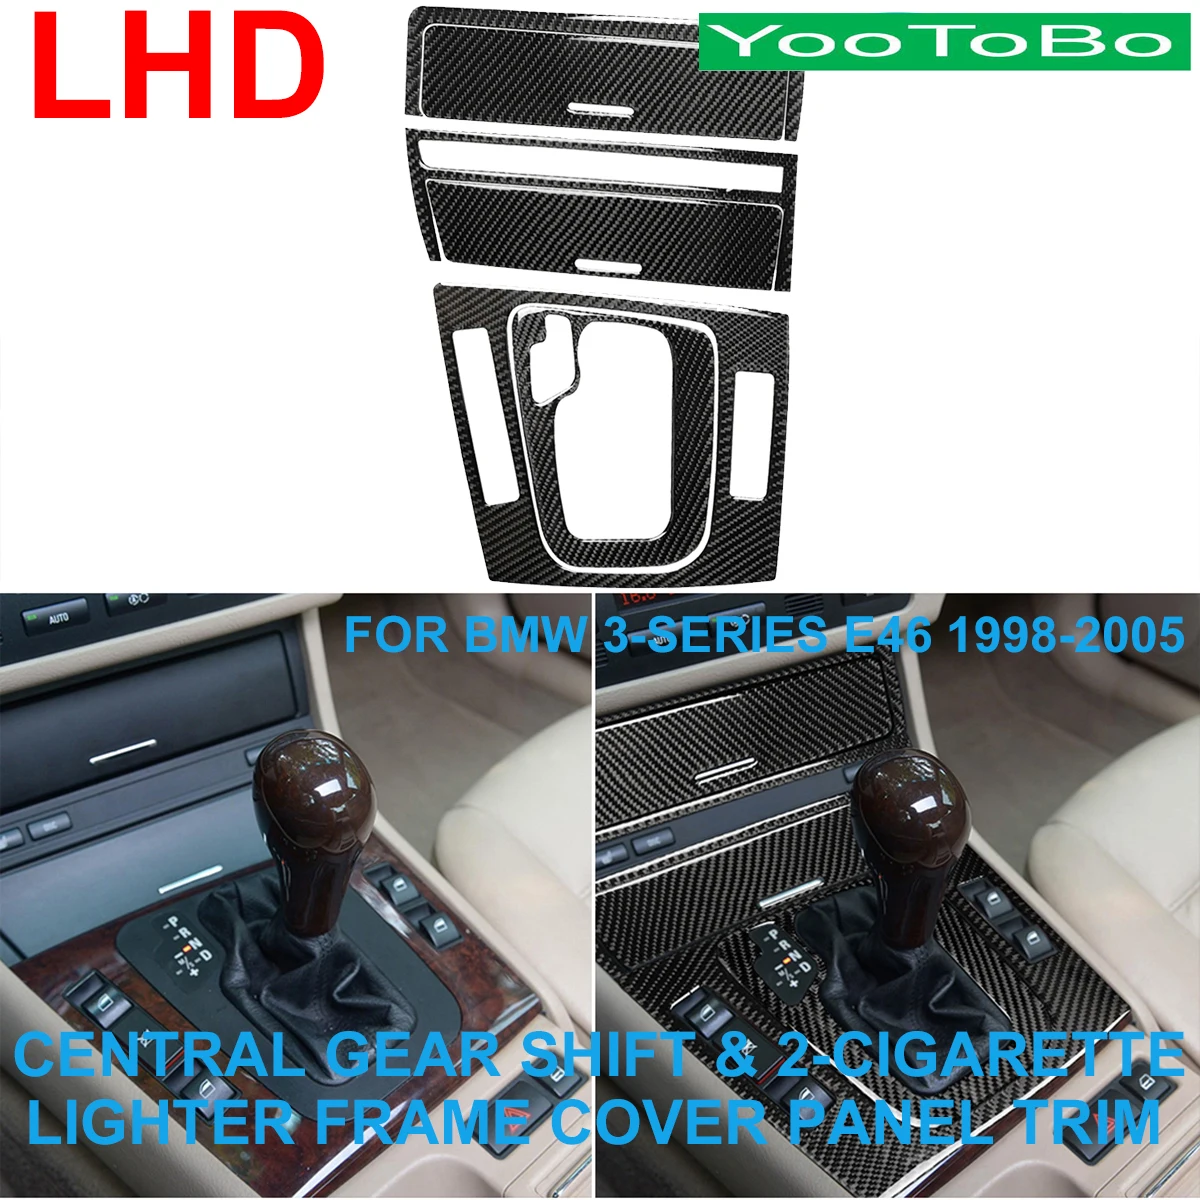 

LHD RHD Car Styling Carbon Fiber Central Gear Shift 2-Cigarette Lighters Frame Cover Panel Trim For BMW 3-Series E46 1998-2005